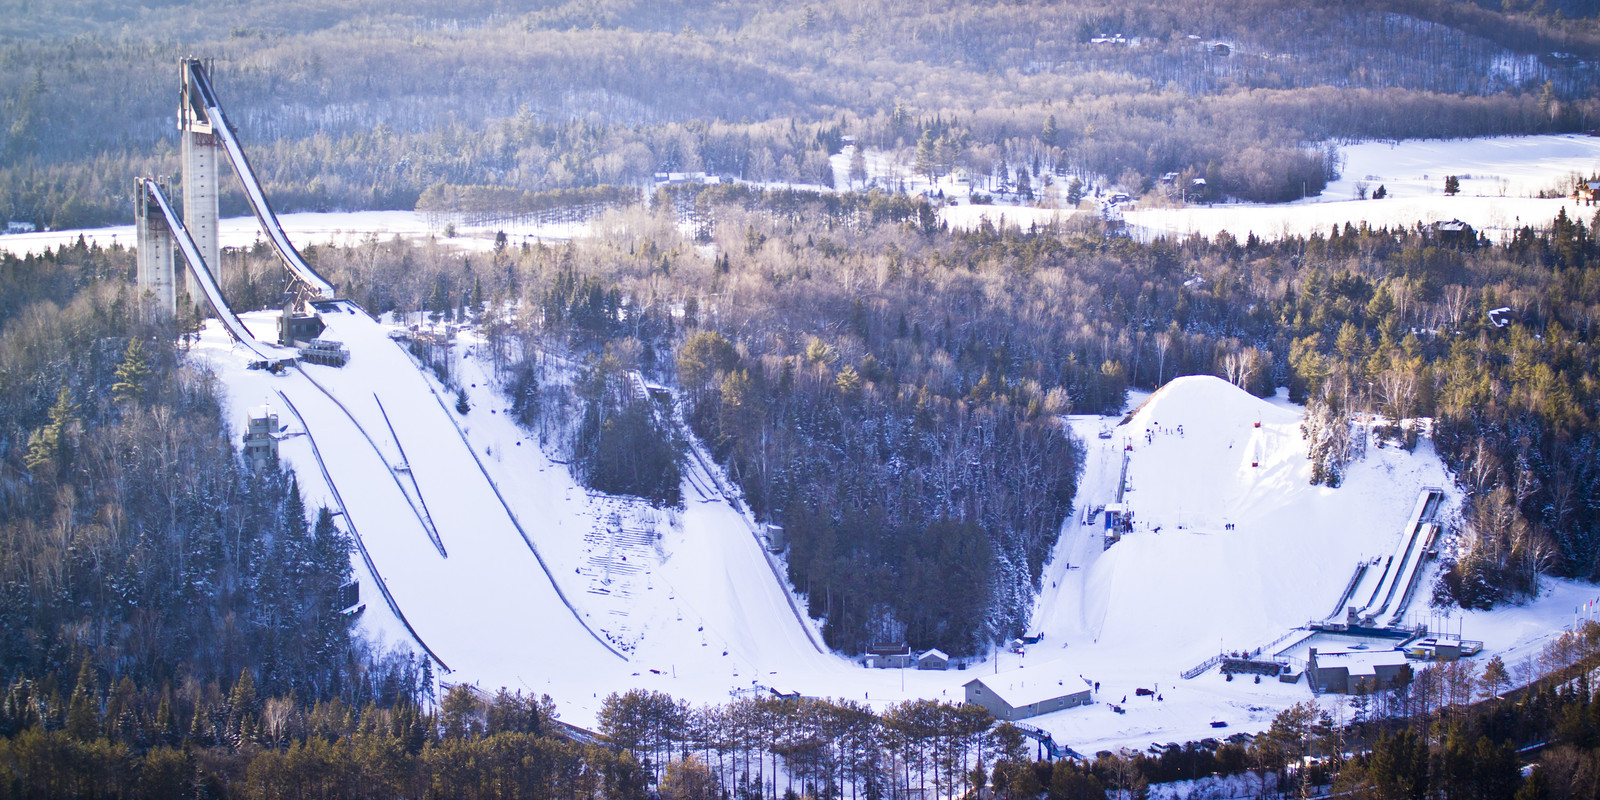 Snow Woes Scrub World Cup Stop In Lake Placid First Tracks intended for Ski Jumping At Lake Placid